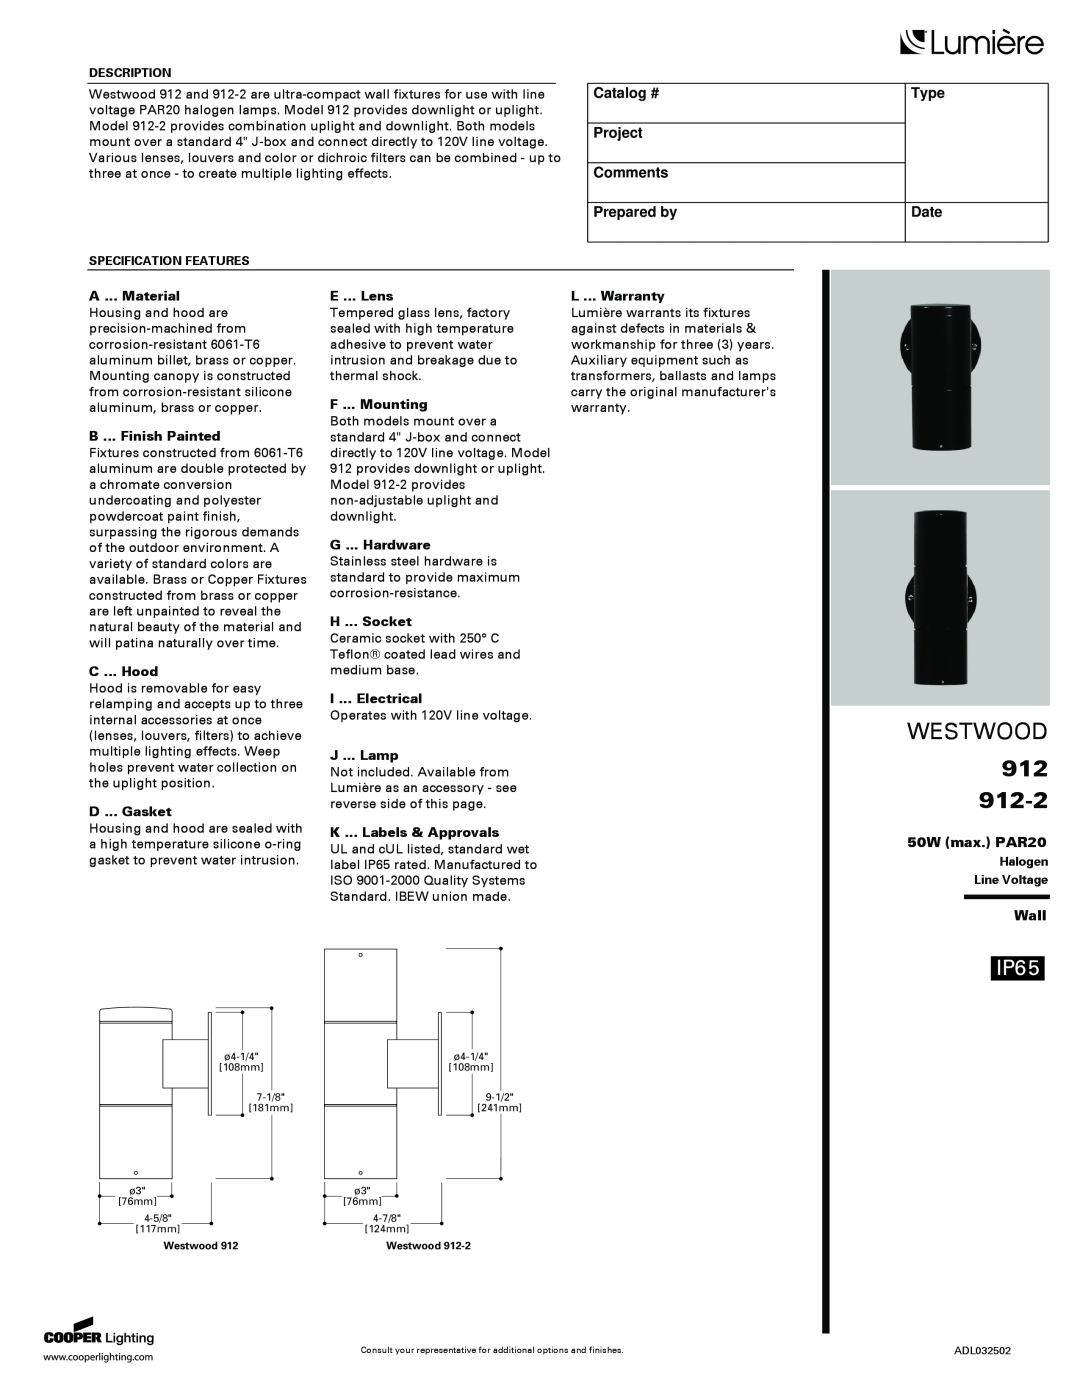 Cooper Lighting 912-2 warranty Catalog # Project Comments Prepared by, Type Date, 50W max. PAR20, Wall, Westwood, IP65 